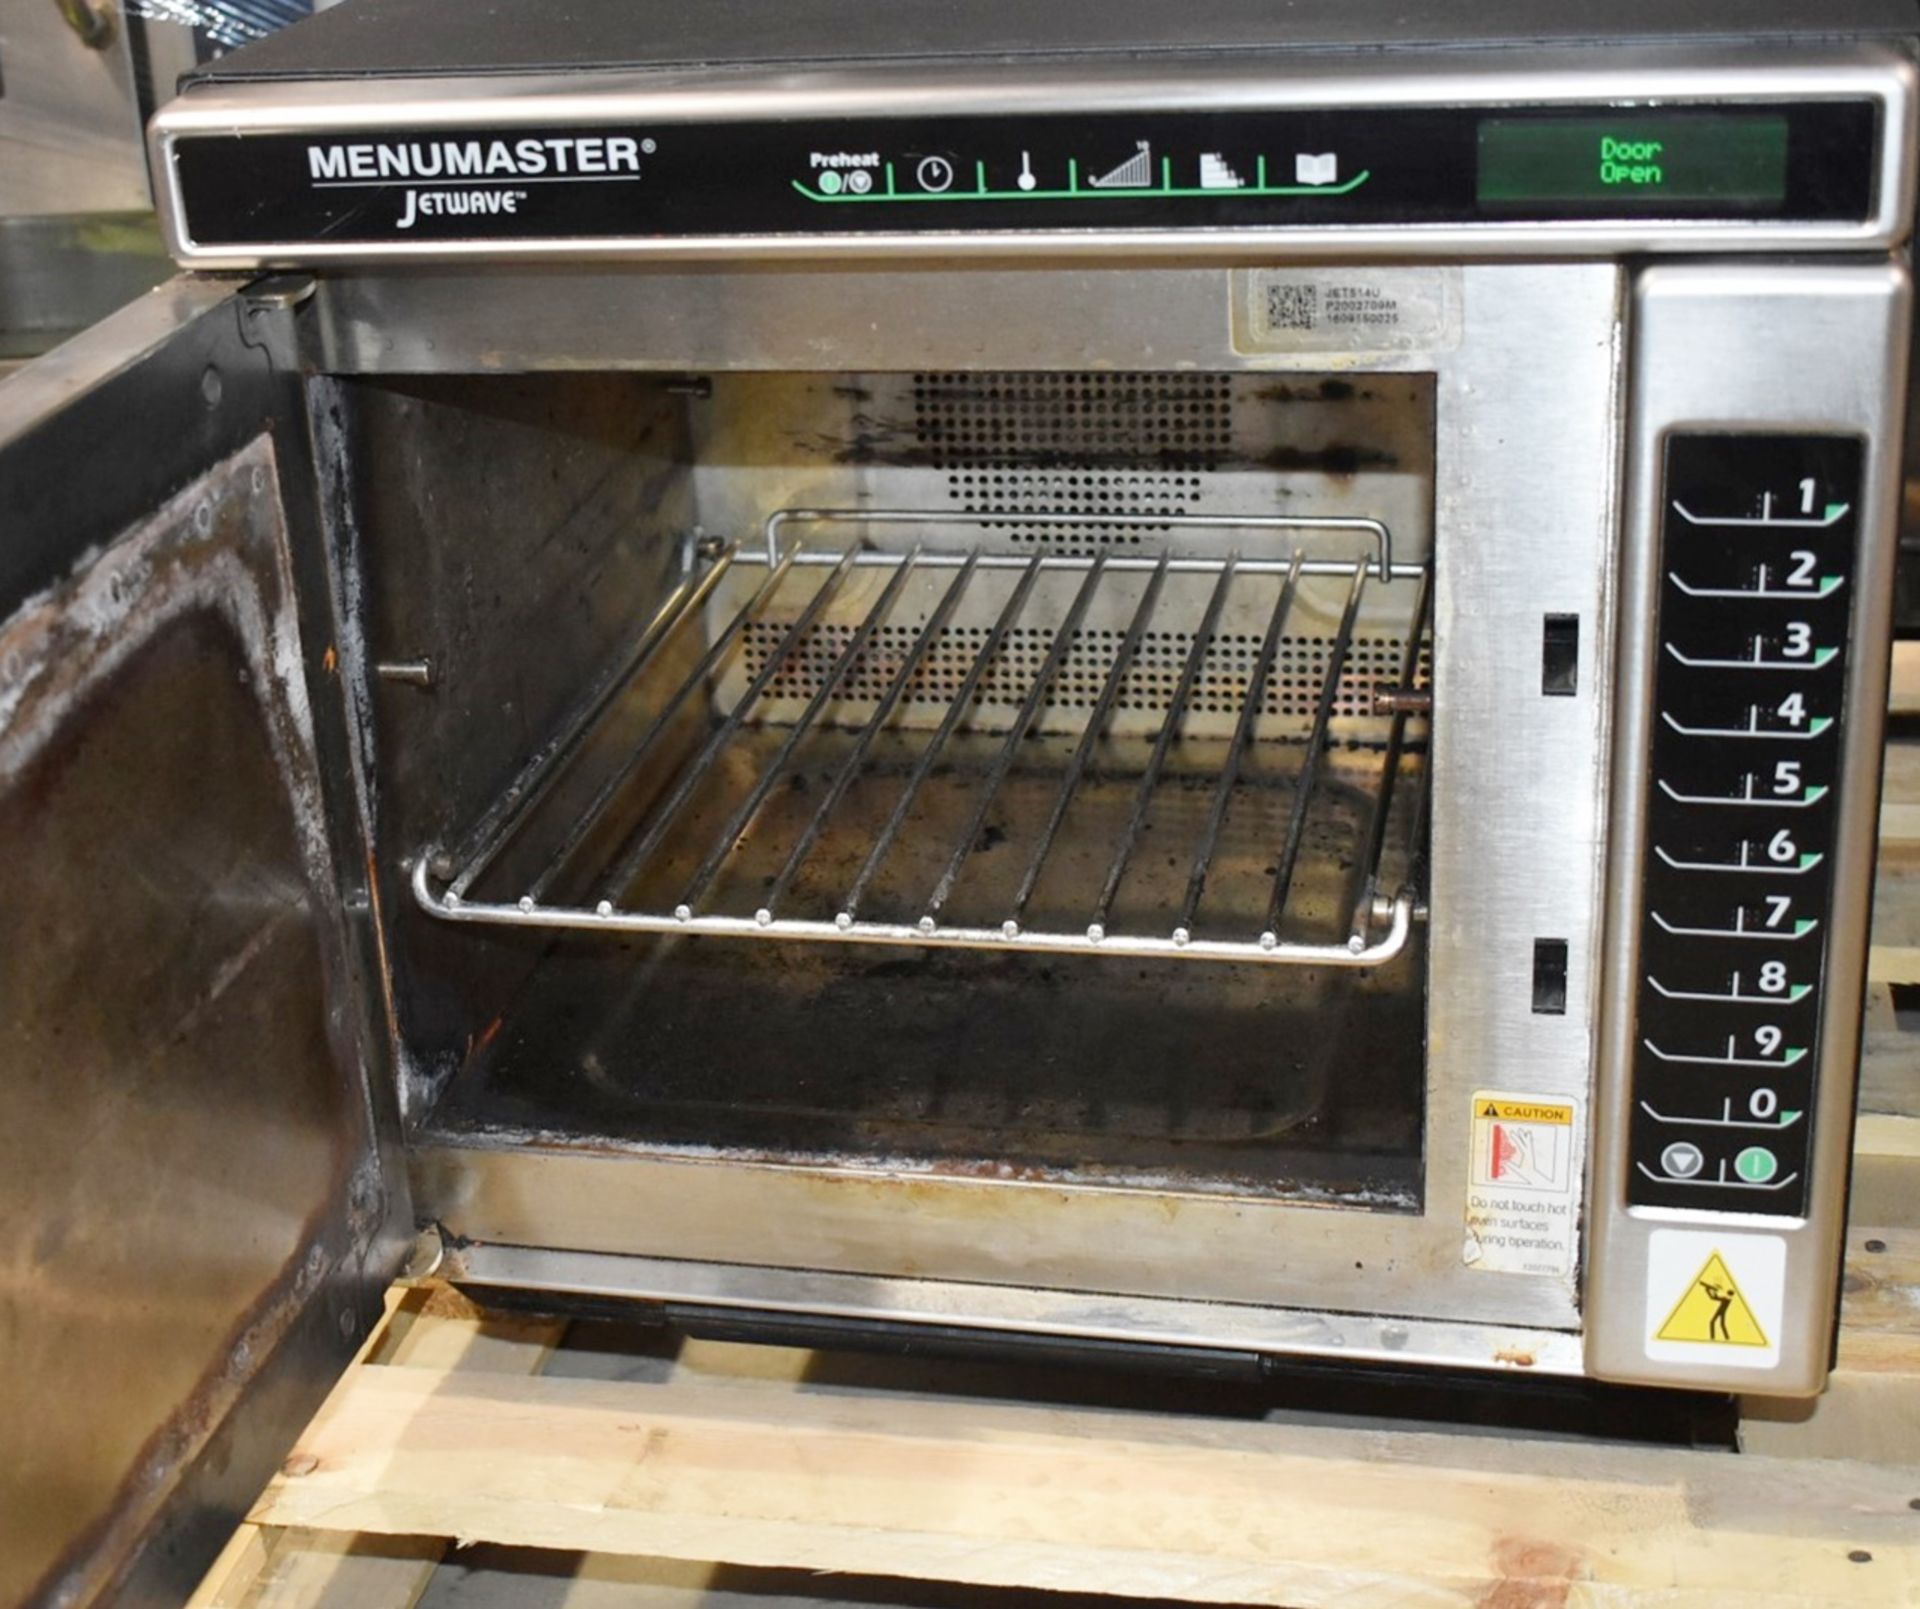 1 x Menumaster Jetwave JET514U High Speed Combination Microwave Oven - RRP £2,400 - Recently Removed - Image 5 of 8